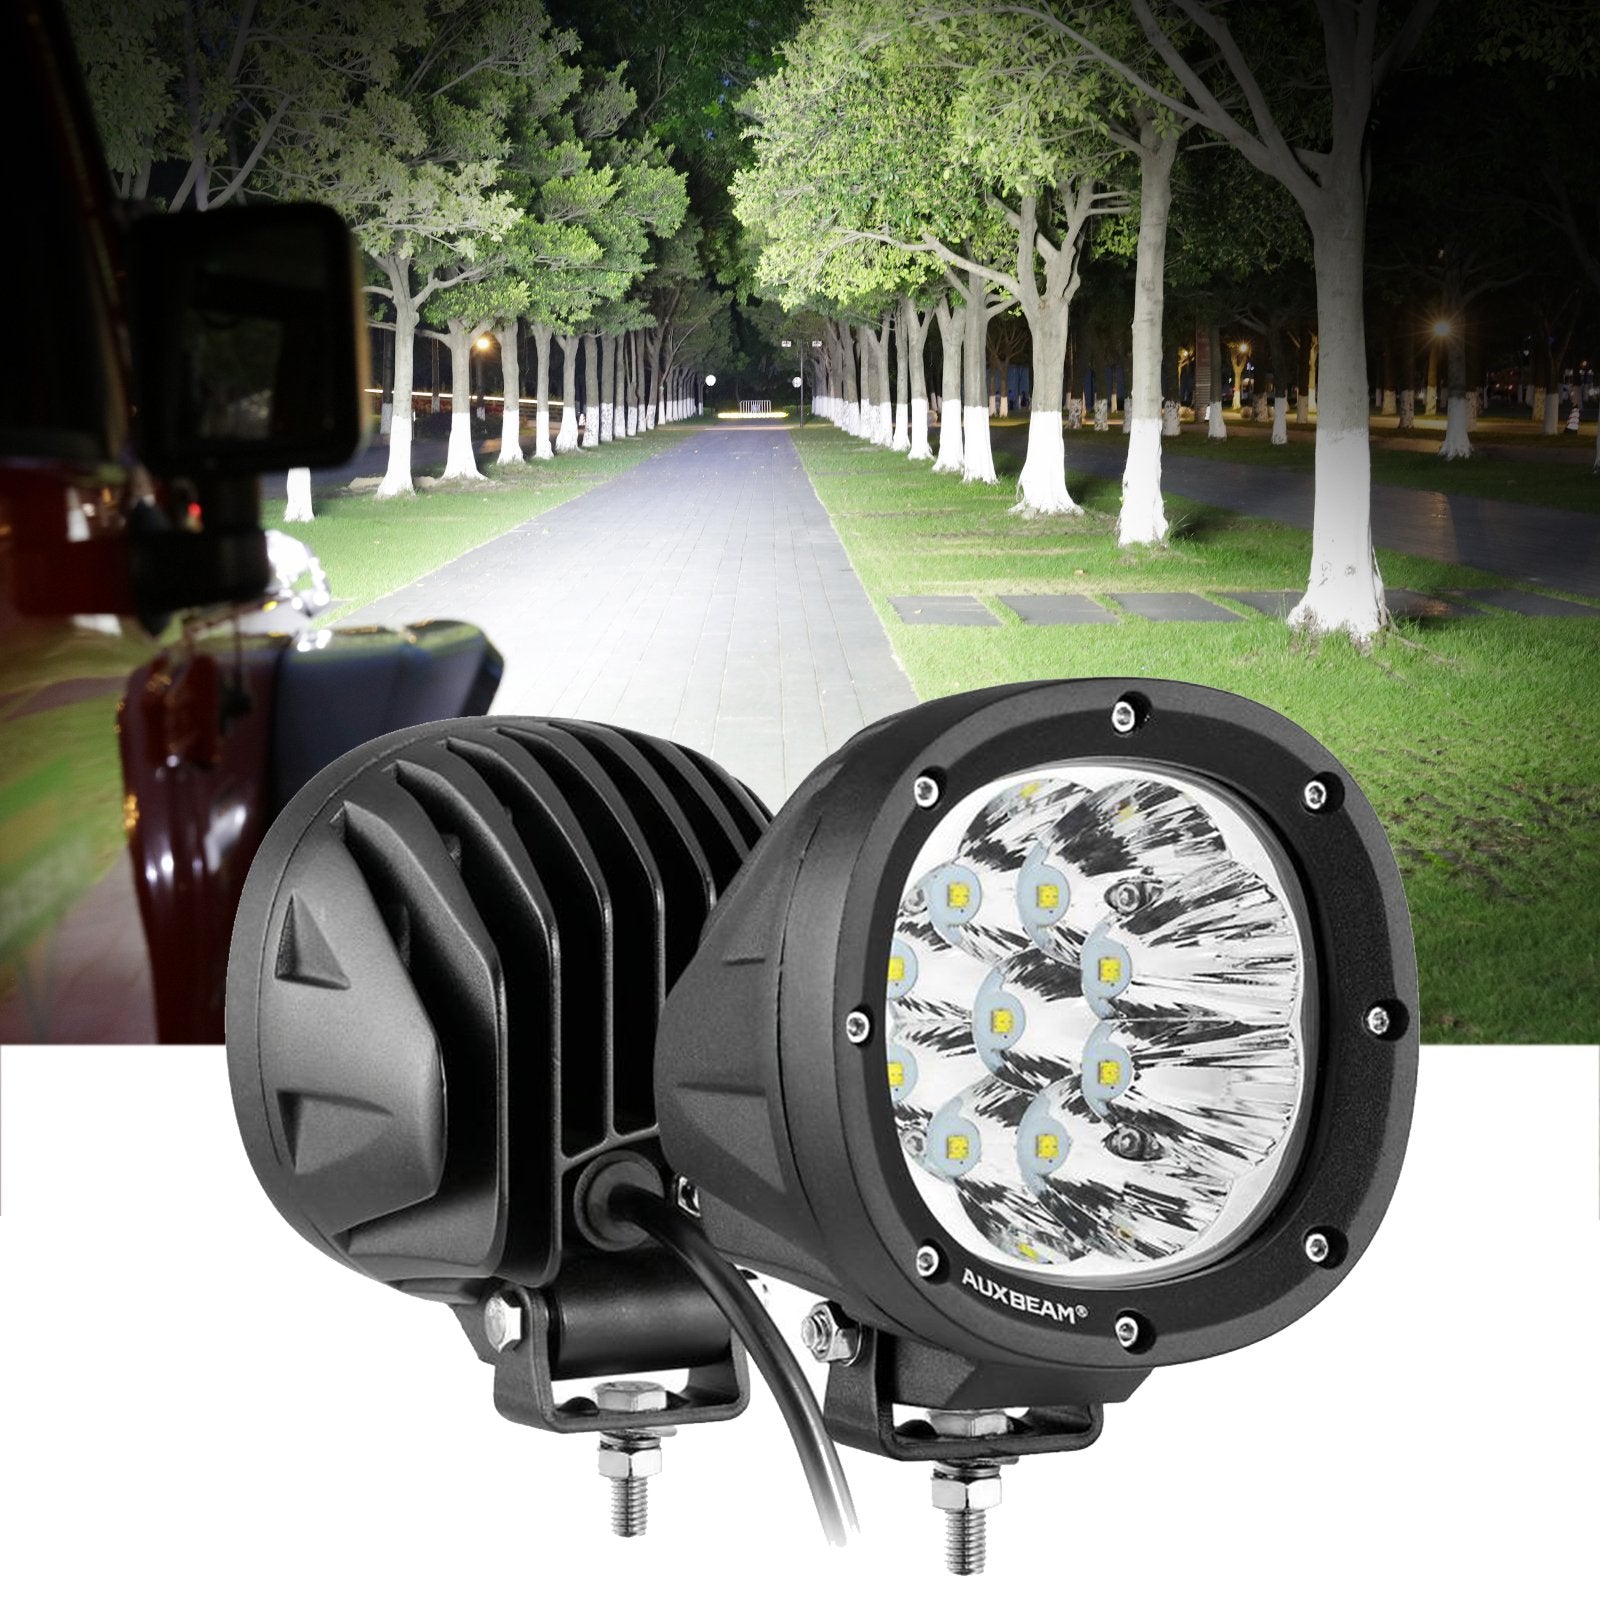 4 Inch 90W Round LED Driving Lights Spot White with Wiring Harness for SUV ATV UTV Trucks Pickup Boat